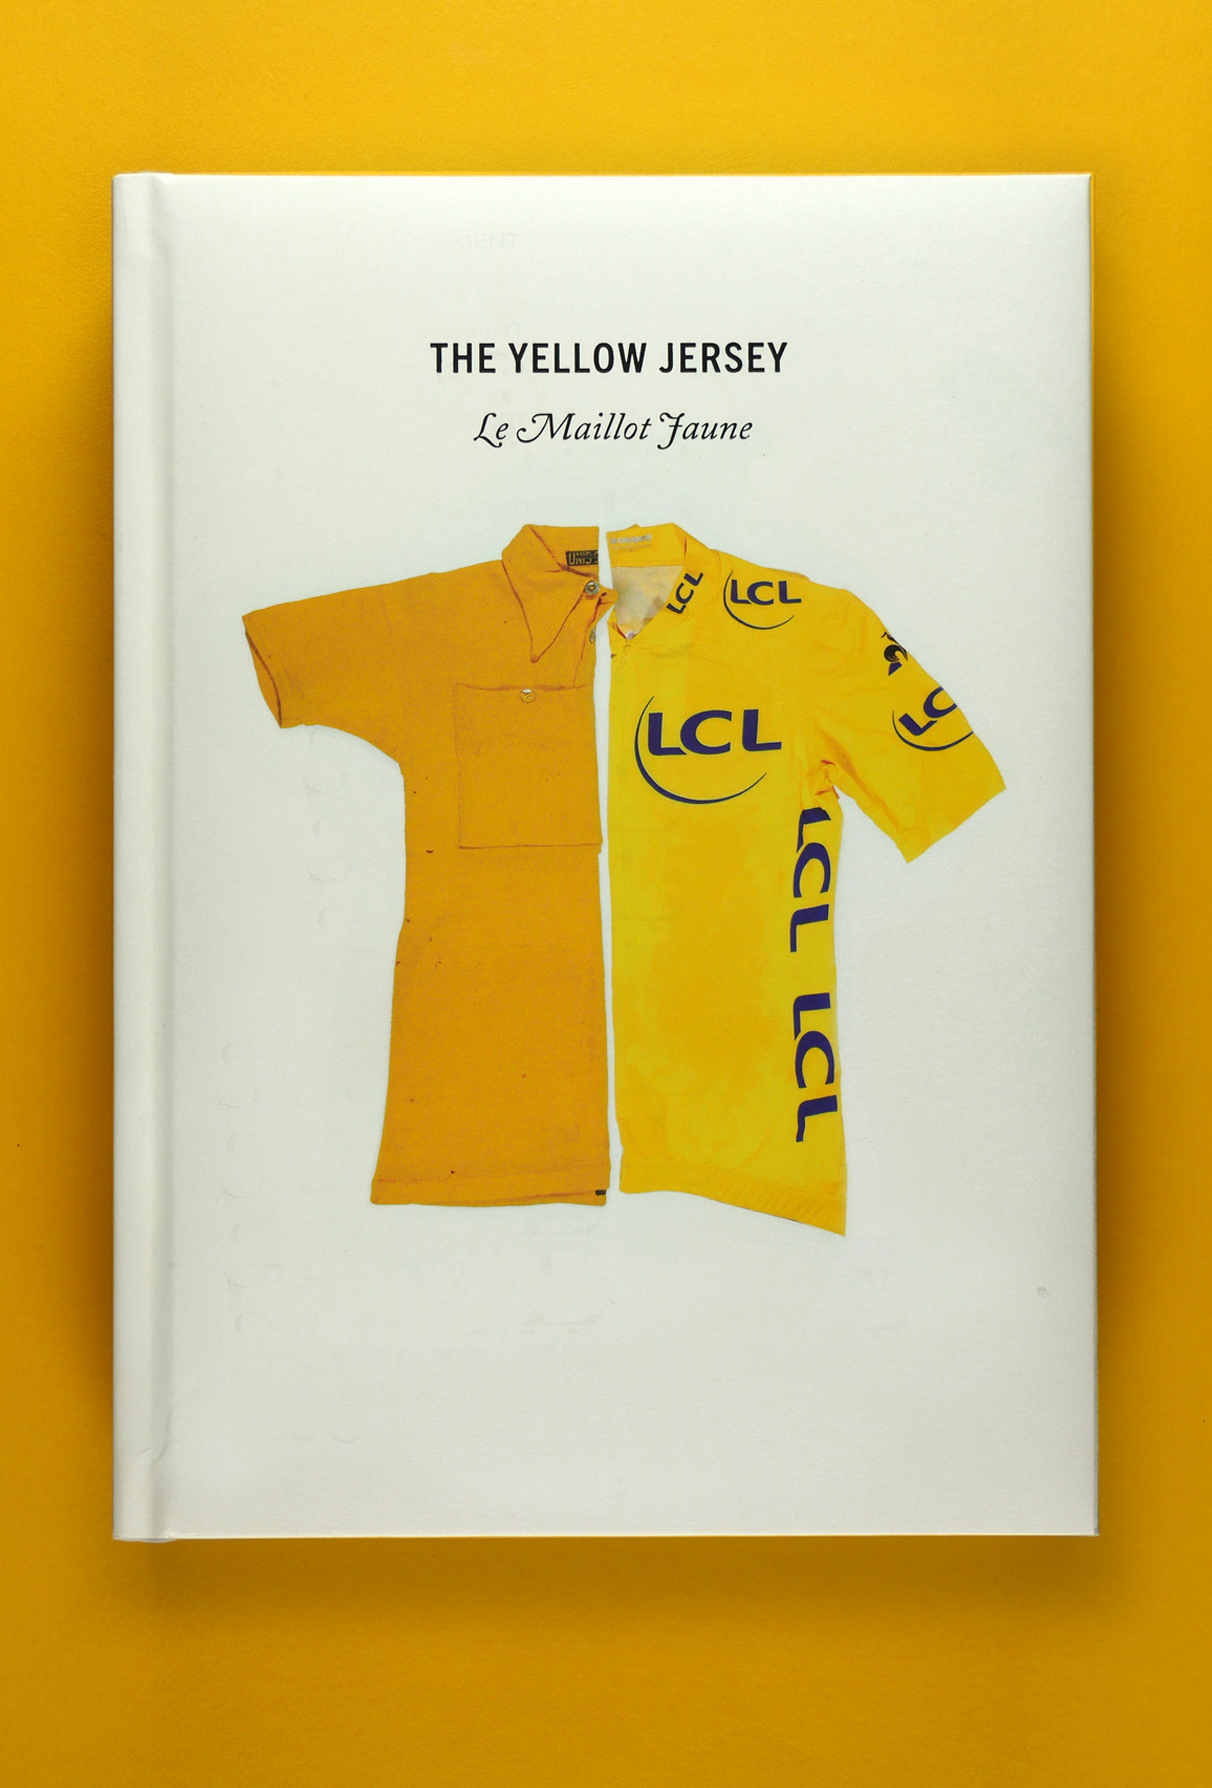 THE YELLOW JERSEY – INSIDE STORY